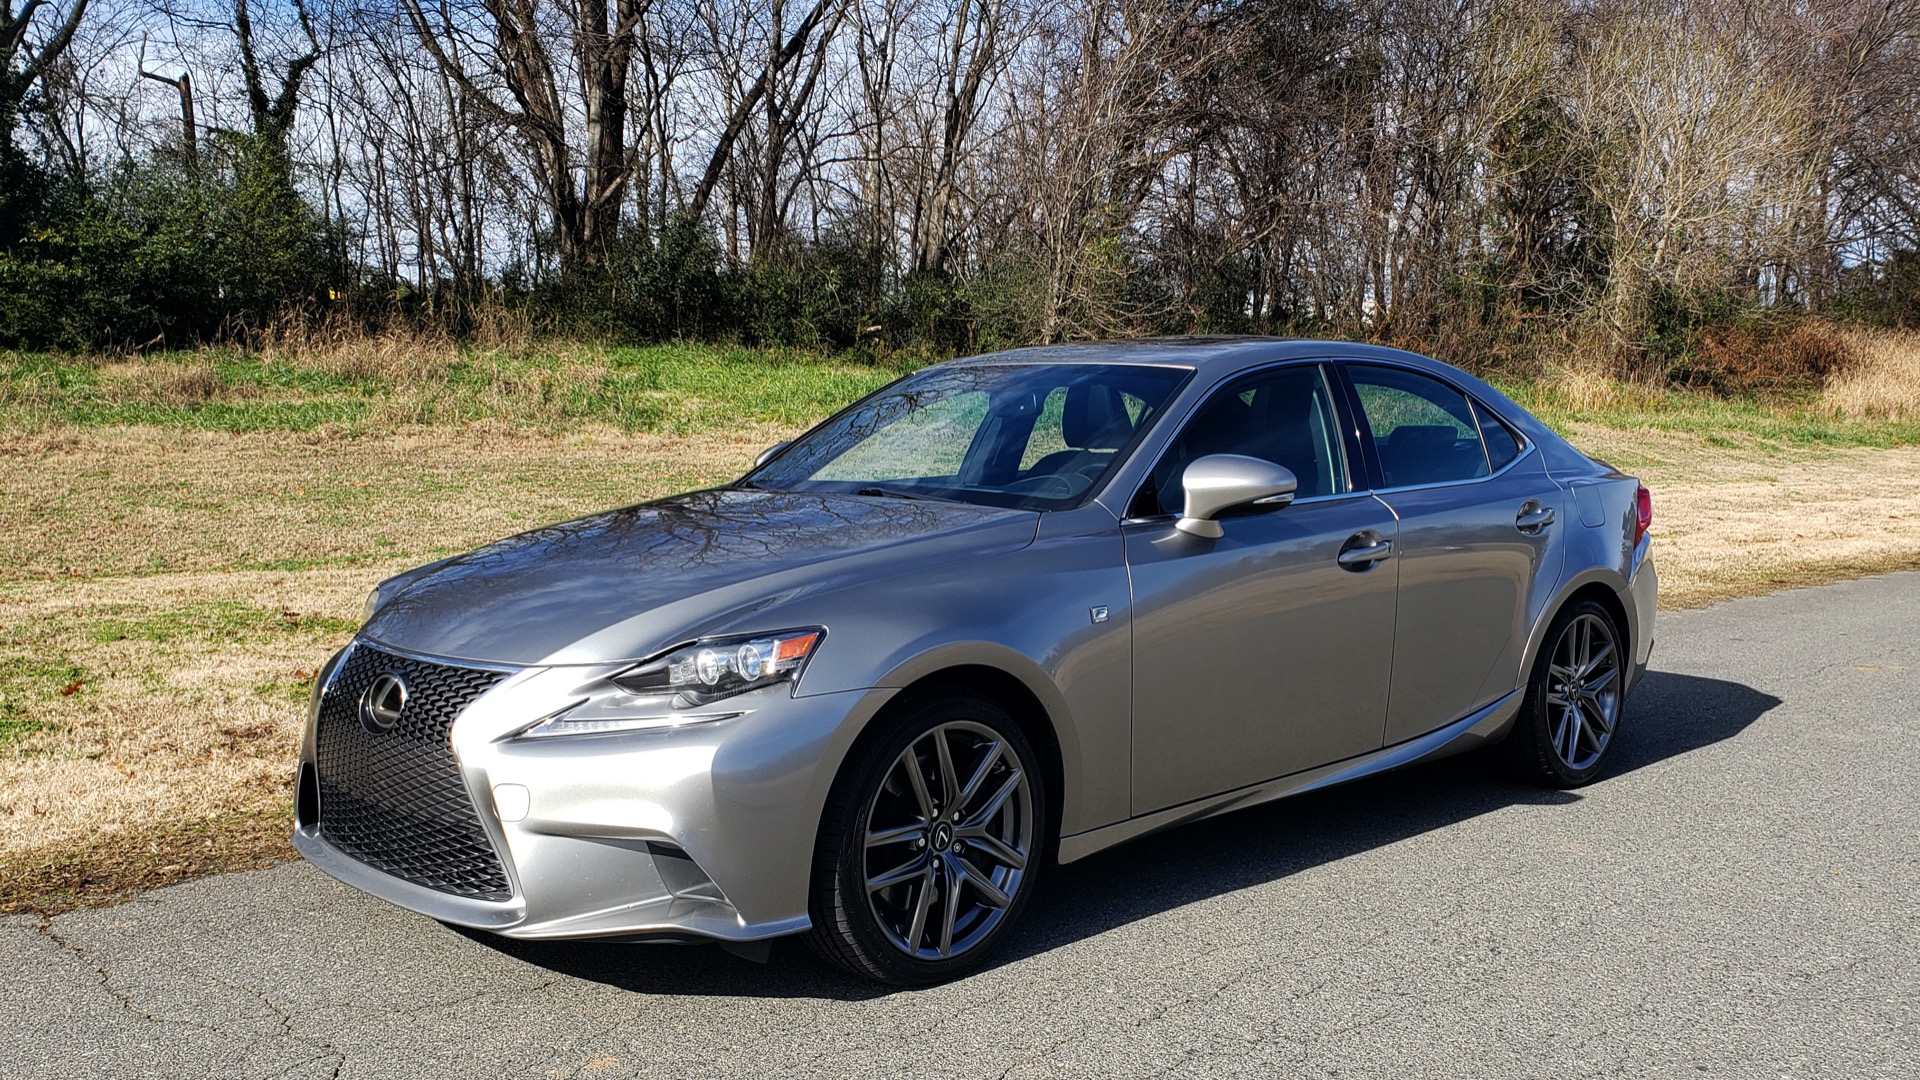 Used 2016 Lexus IS 200t F-SPORT / SUNROOF / NAV / BSM / DYNAMIC RADAR CRUISE for sale Sold at Formula Imports in Charlotte NC 28227 1